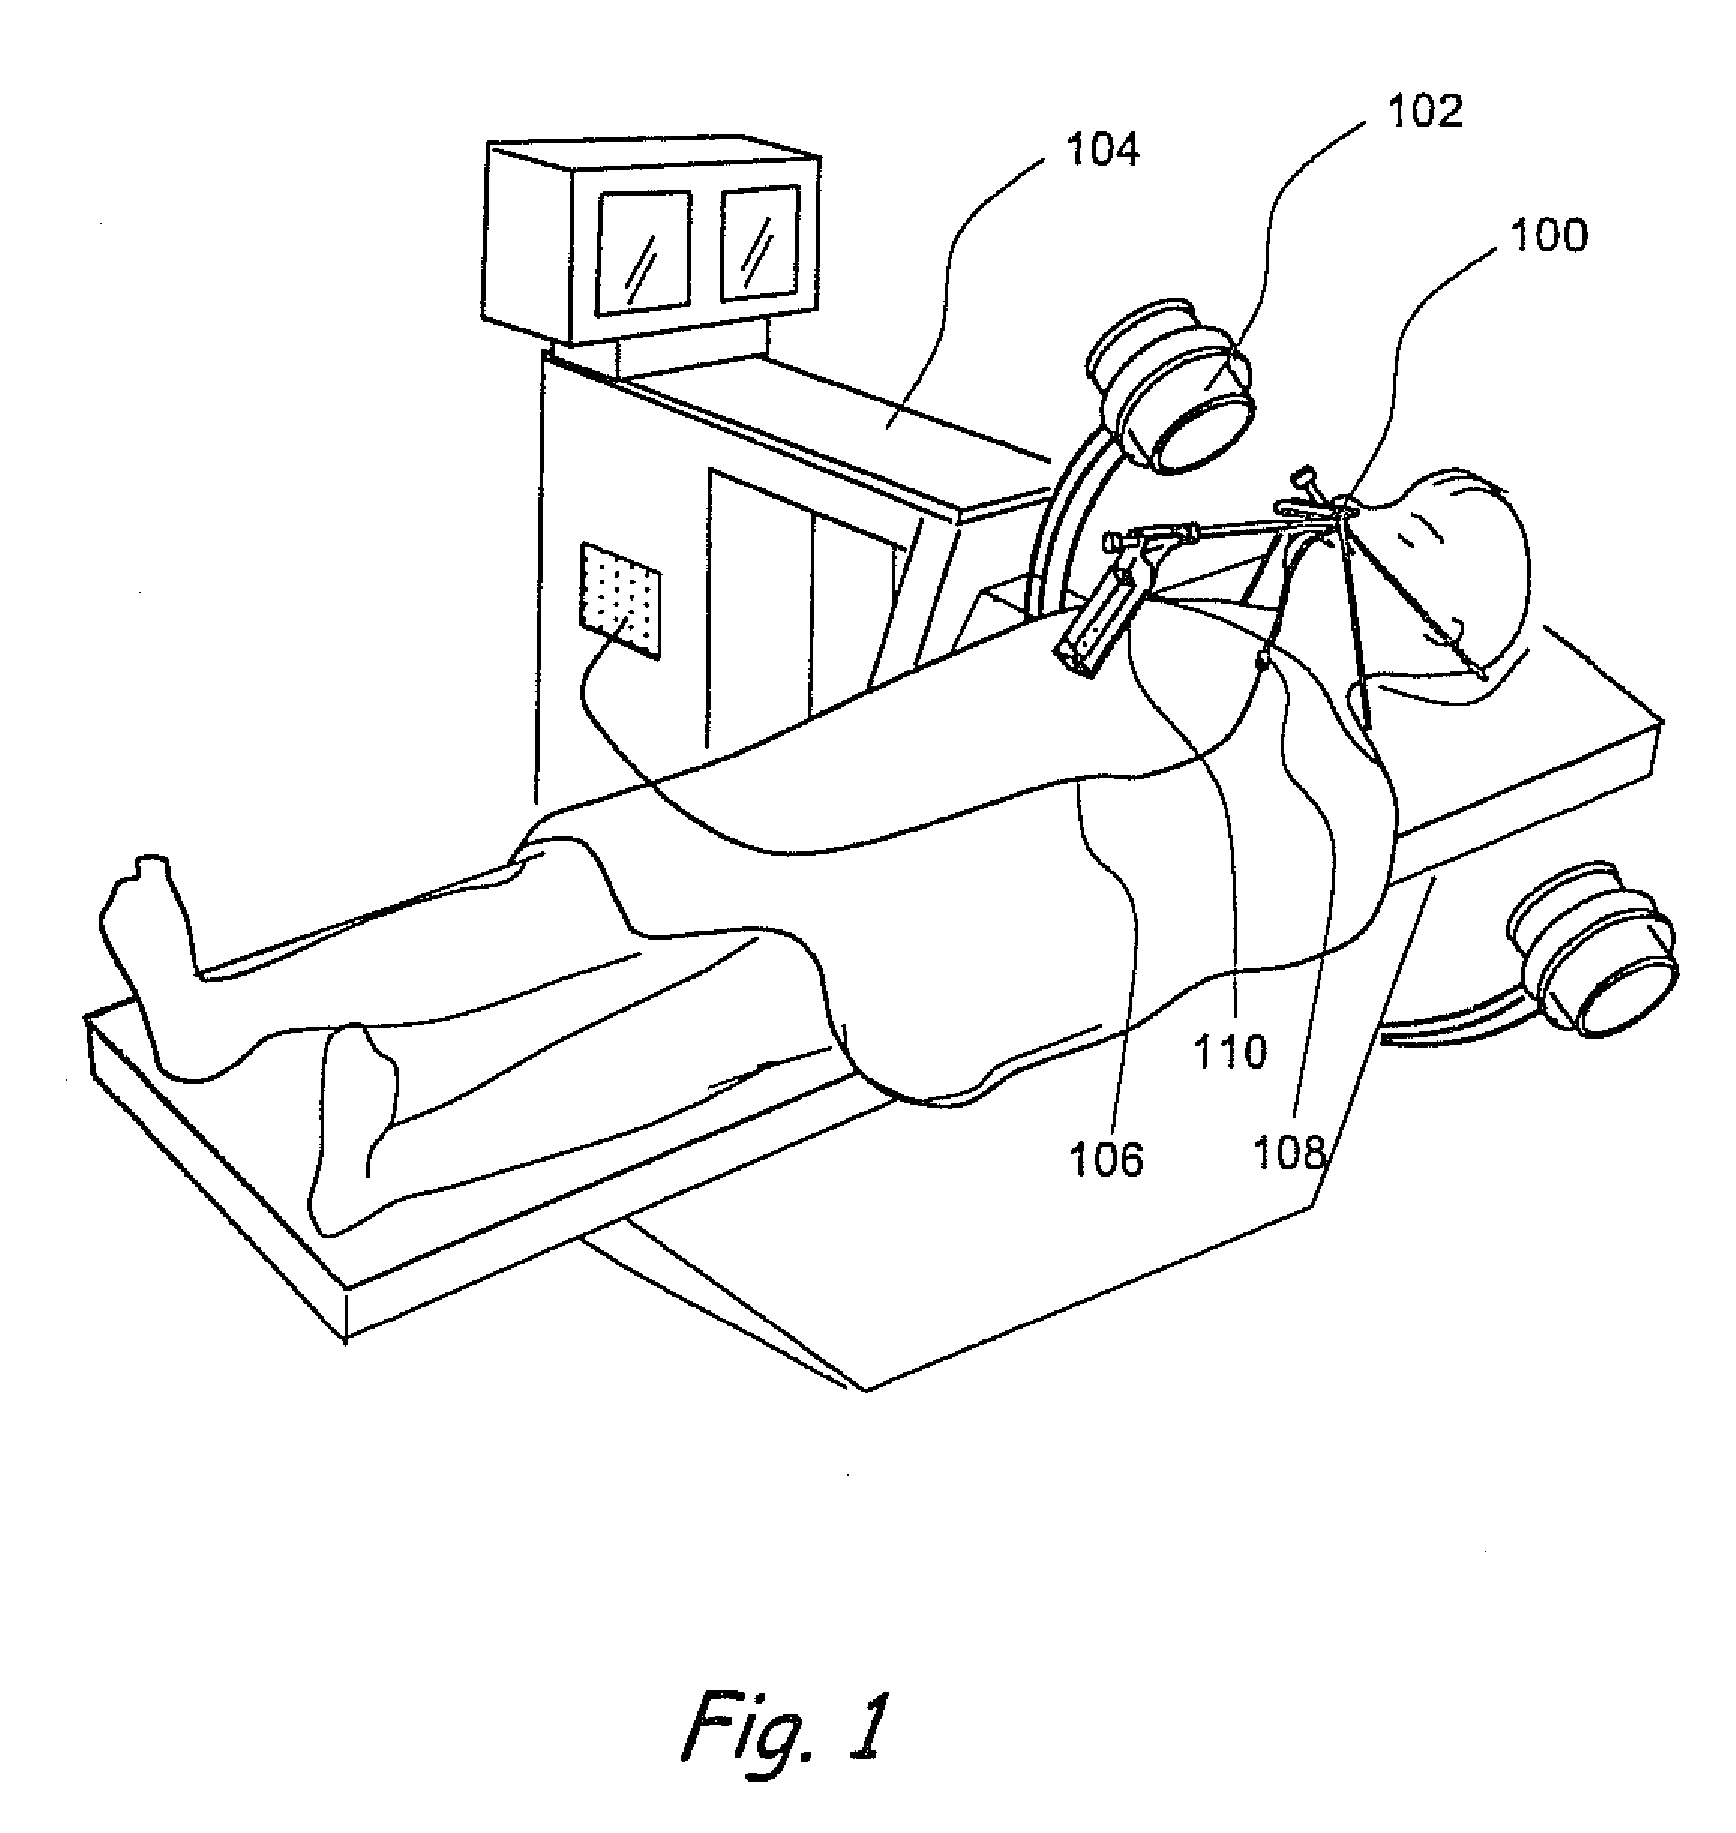 Methods and Apparatus for Treating Disorders of the Ear Nose and Throat